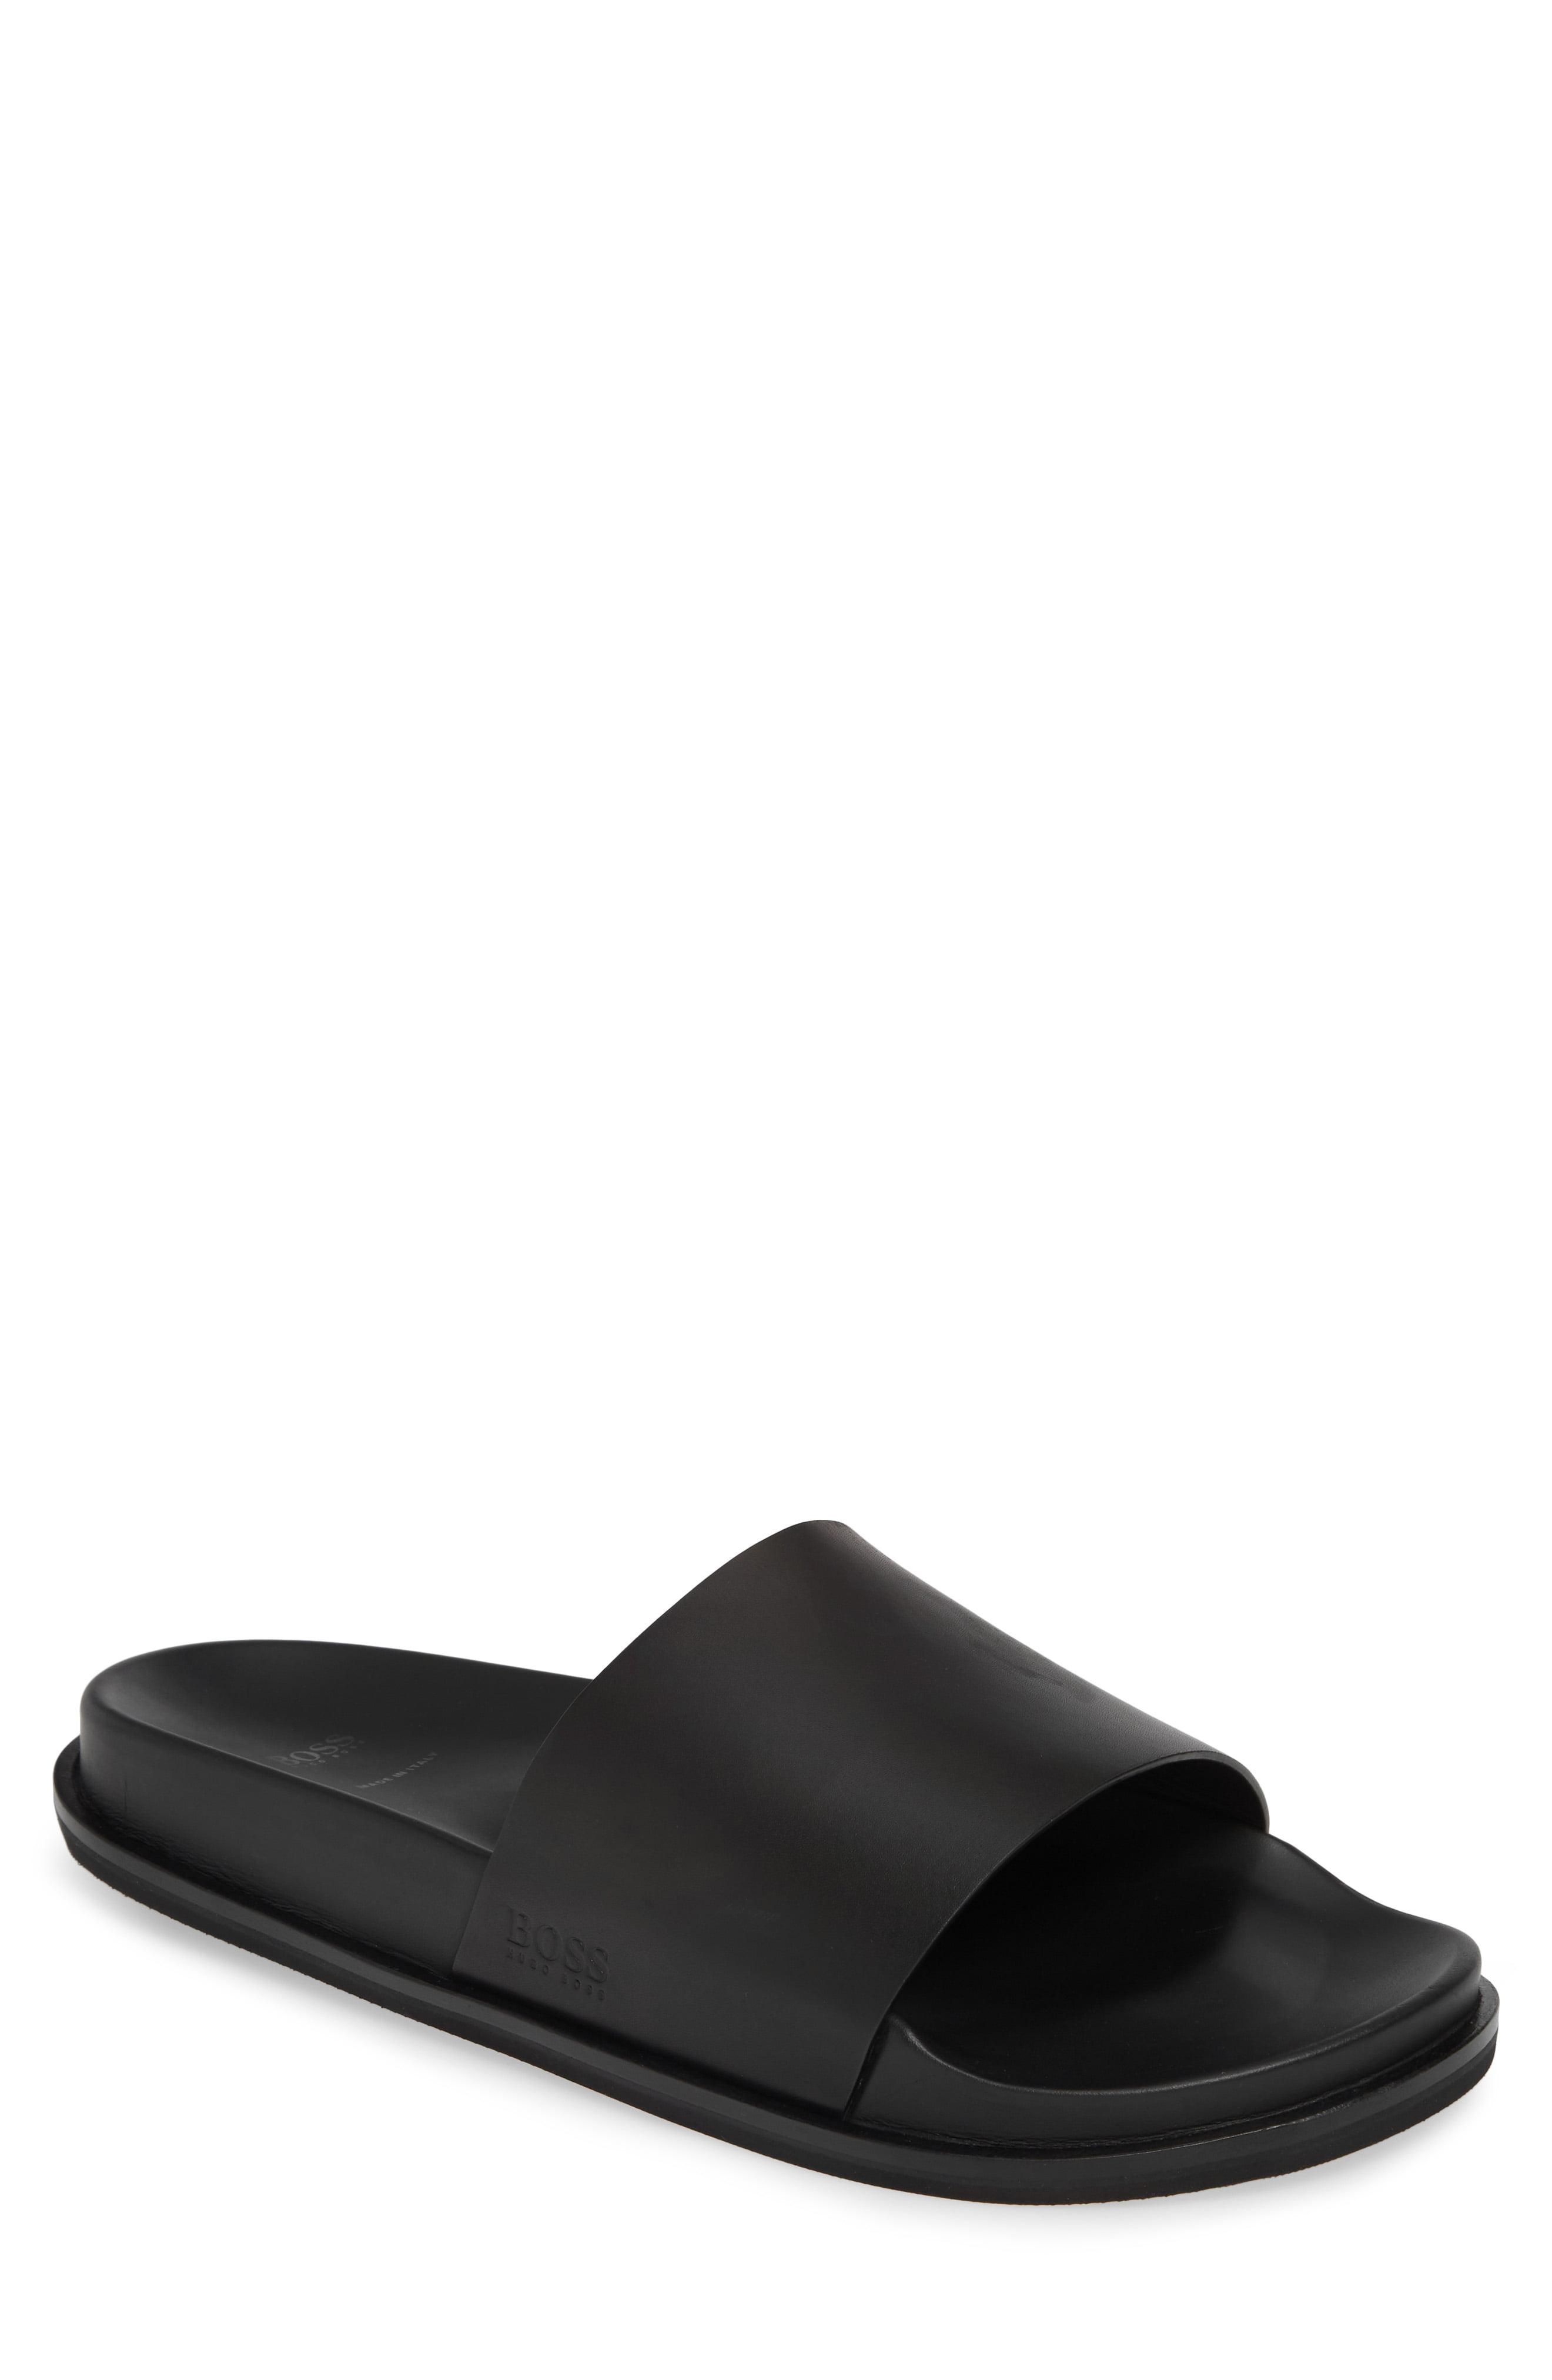 BOSS by Hugo Boss Cliff Leather Slide Sandal in Black Polished Leather ...